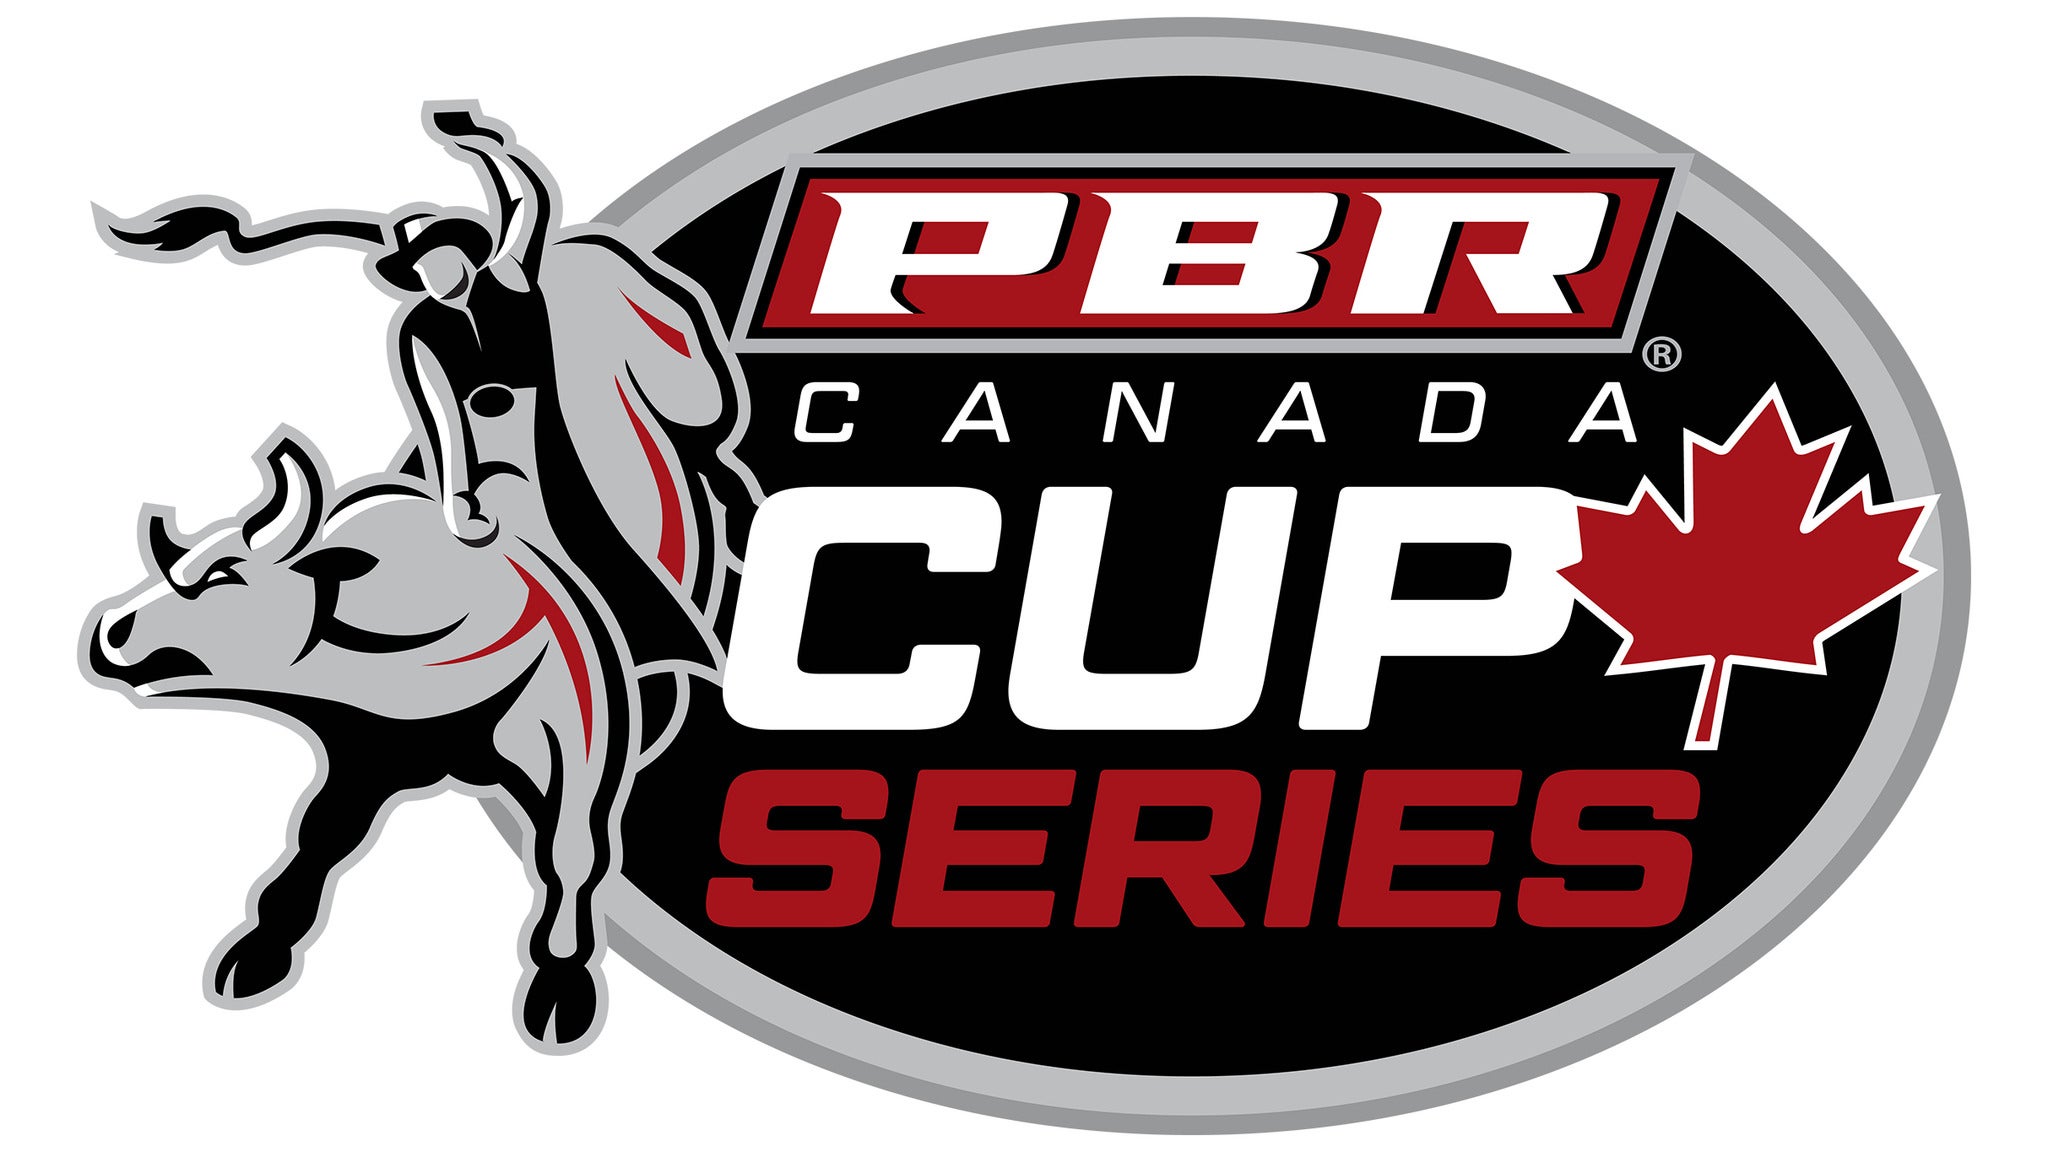 PBR Canadian Cup Series Tickets | Single Game Tickets & Schedule